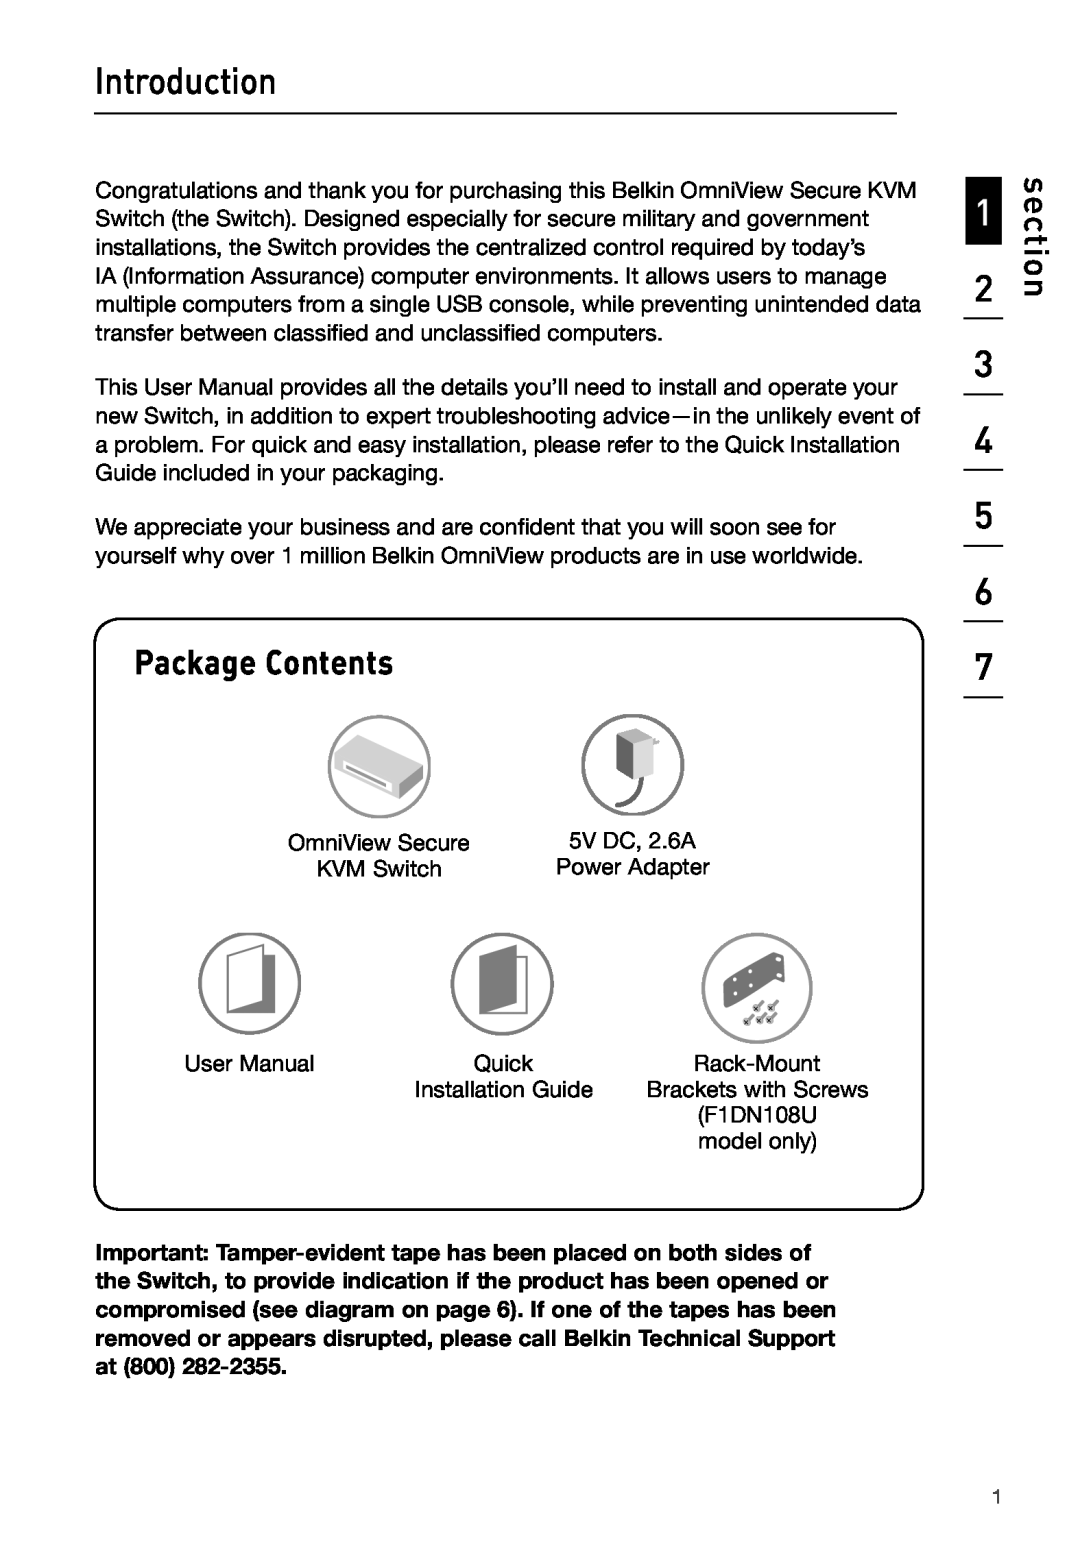 Belkin P75209 manual Introduction, Package Contents, section 